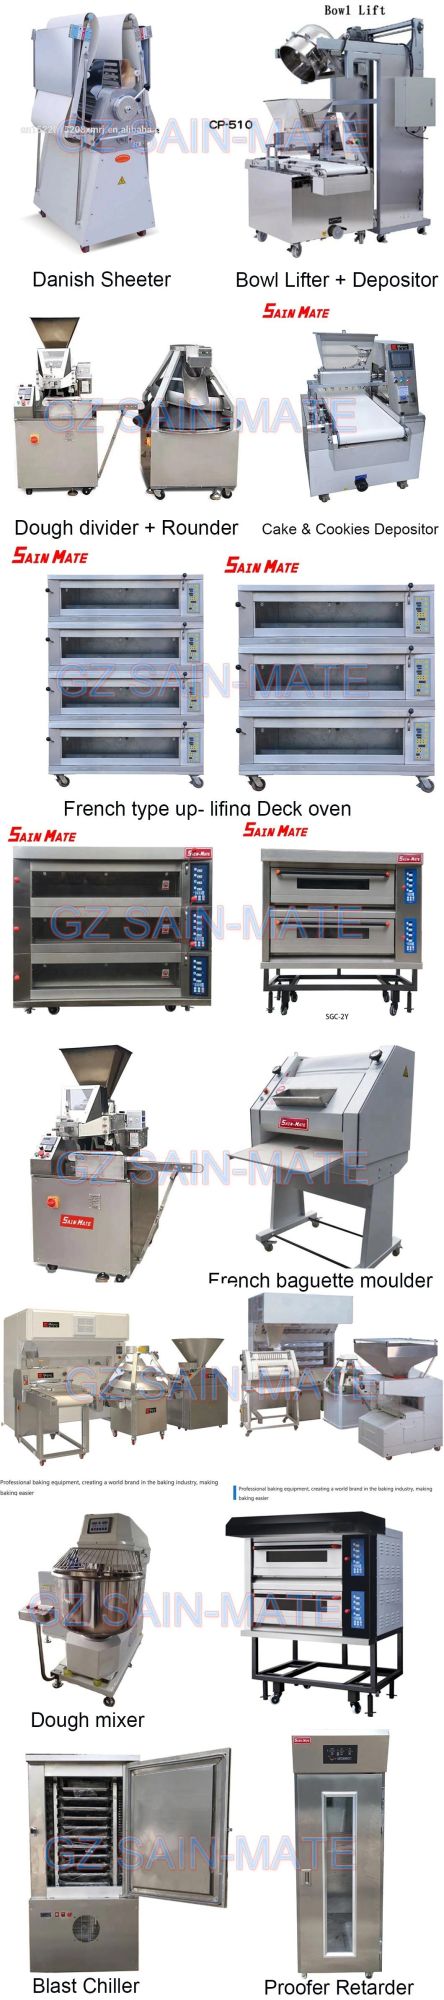 Factory 16 Trays Kitchen Catering Bakery Equipment Commercial Electric Biscuit Bread Rotary Baking Oven